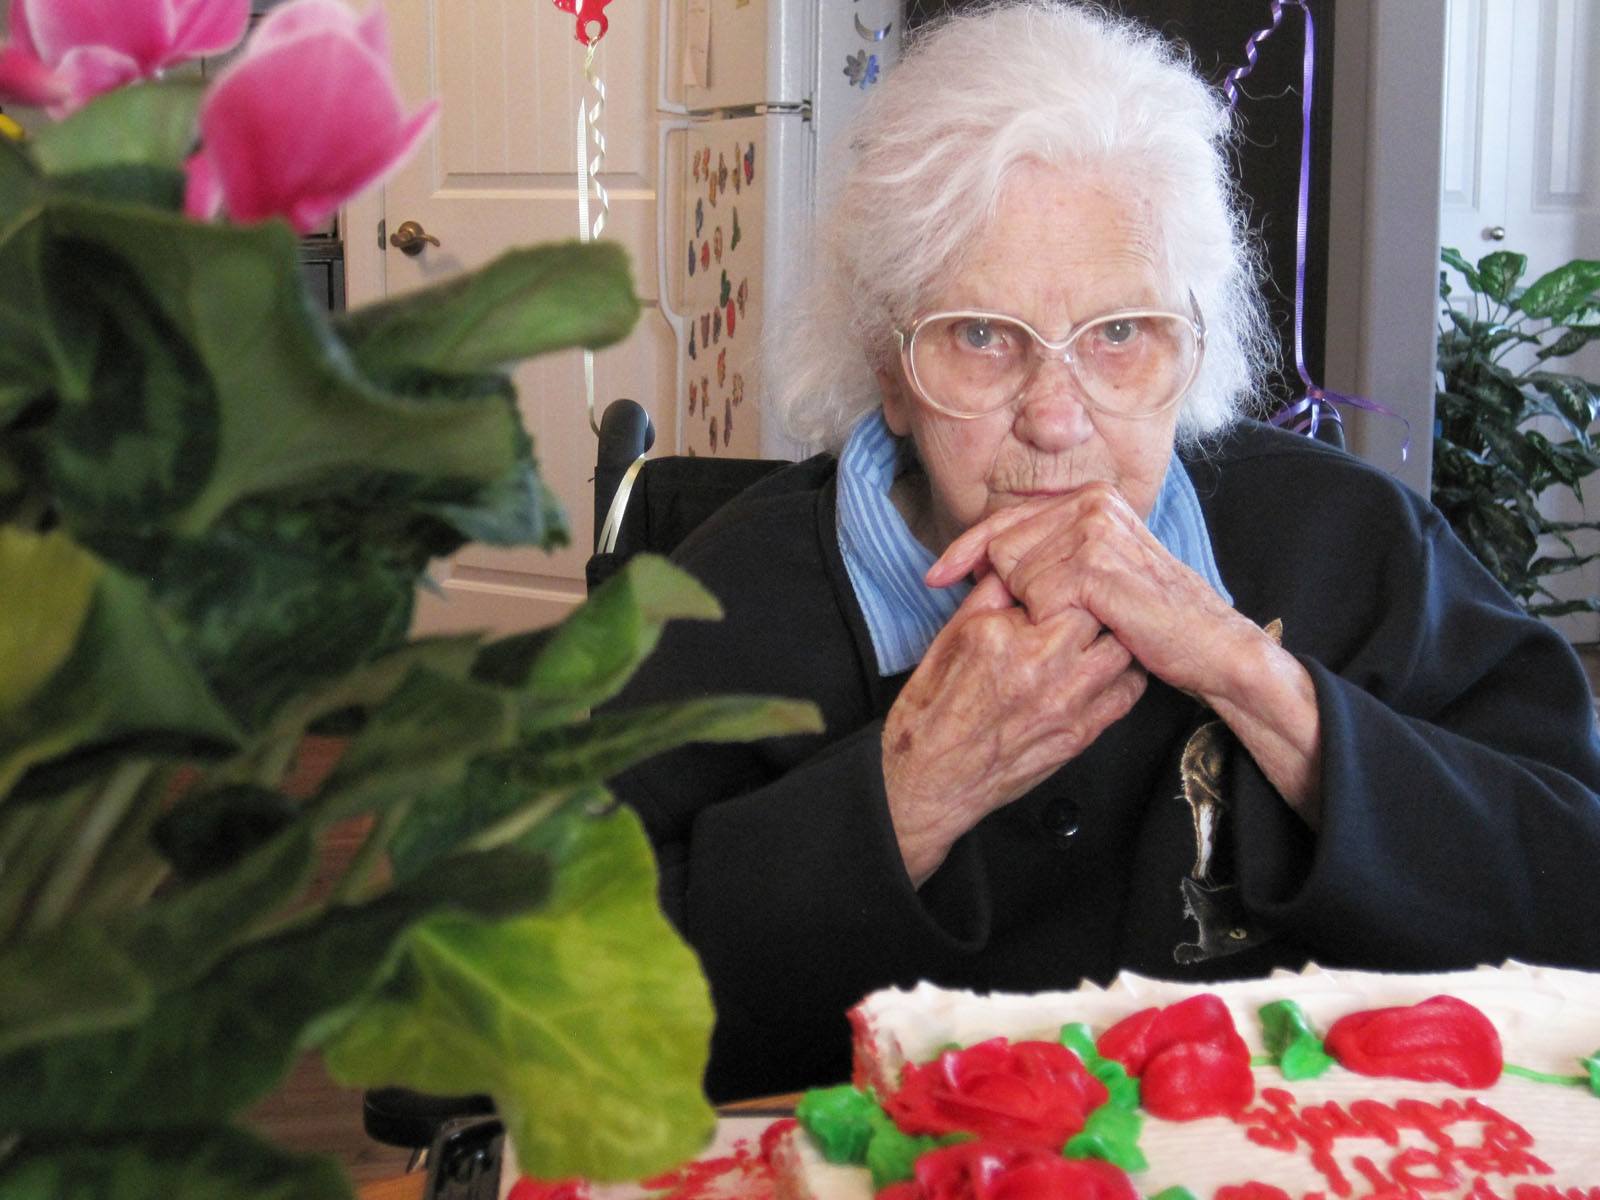 WONDERFUL MILESTONE -Mary Dubyna of Red Deer marked her 110th birthday on Sept. 22 with friends and family.